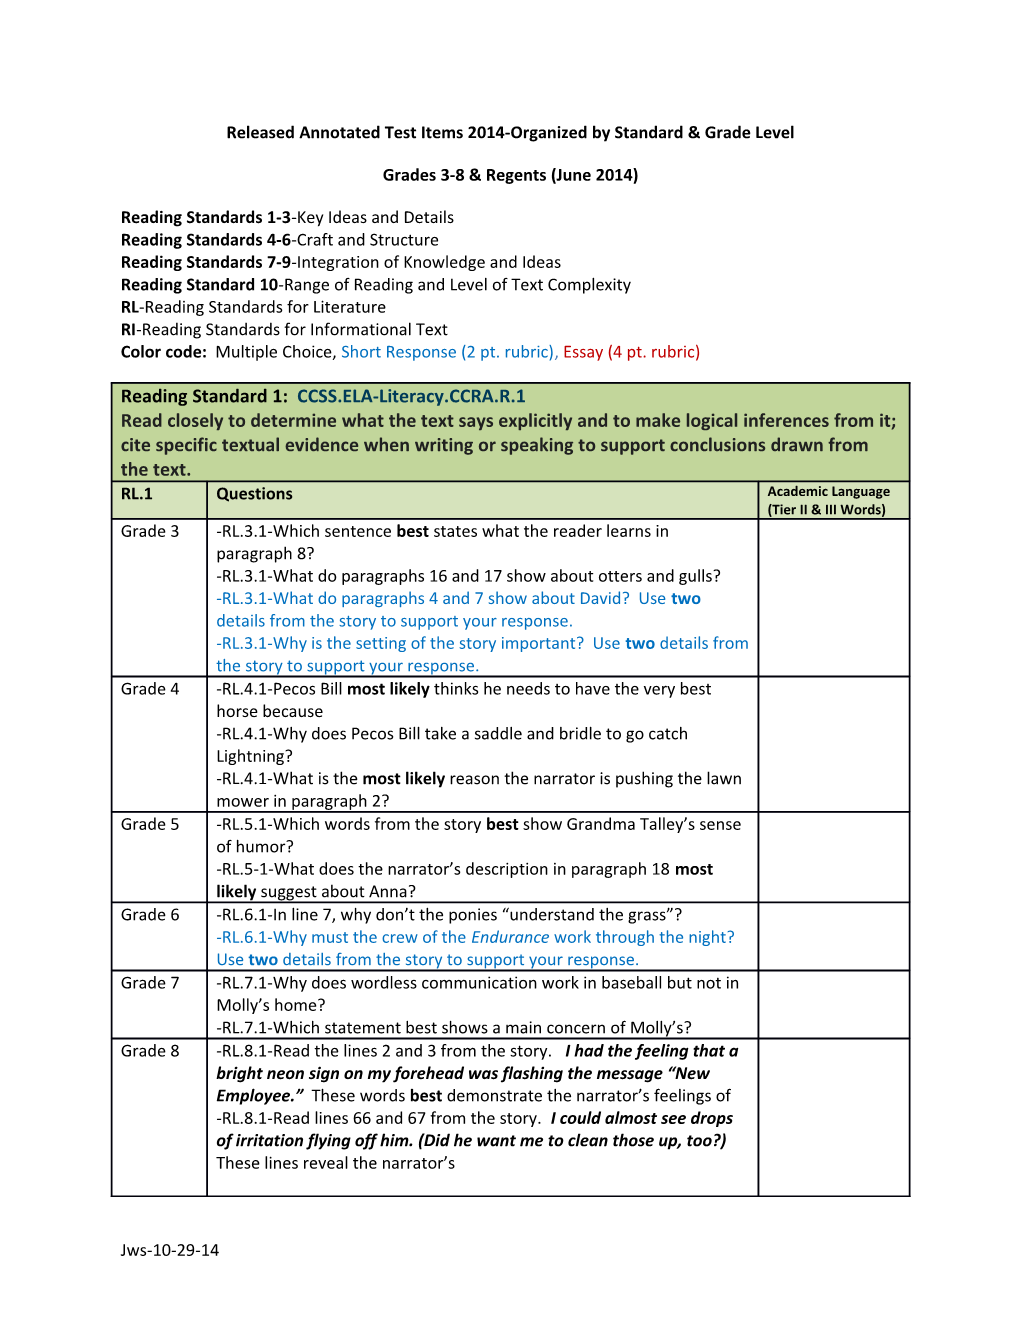 Released Annotated Test Items 2014-Organized by Standard & Grade Level